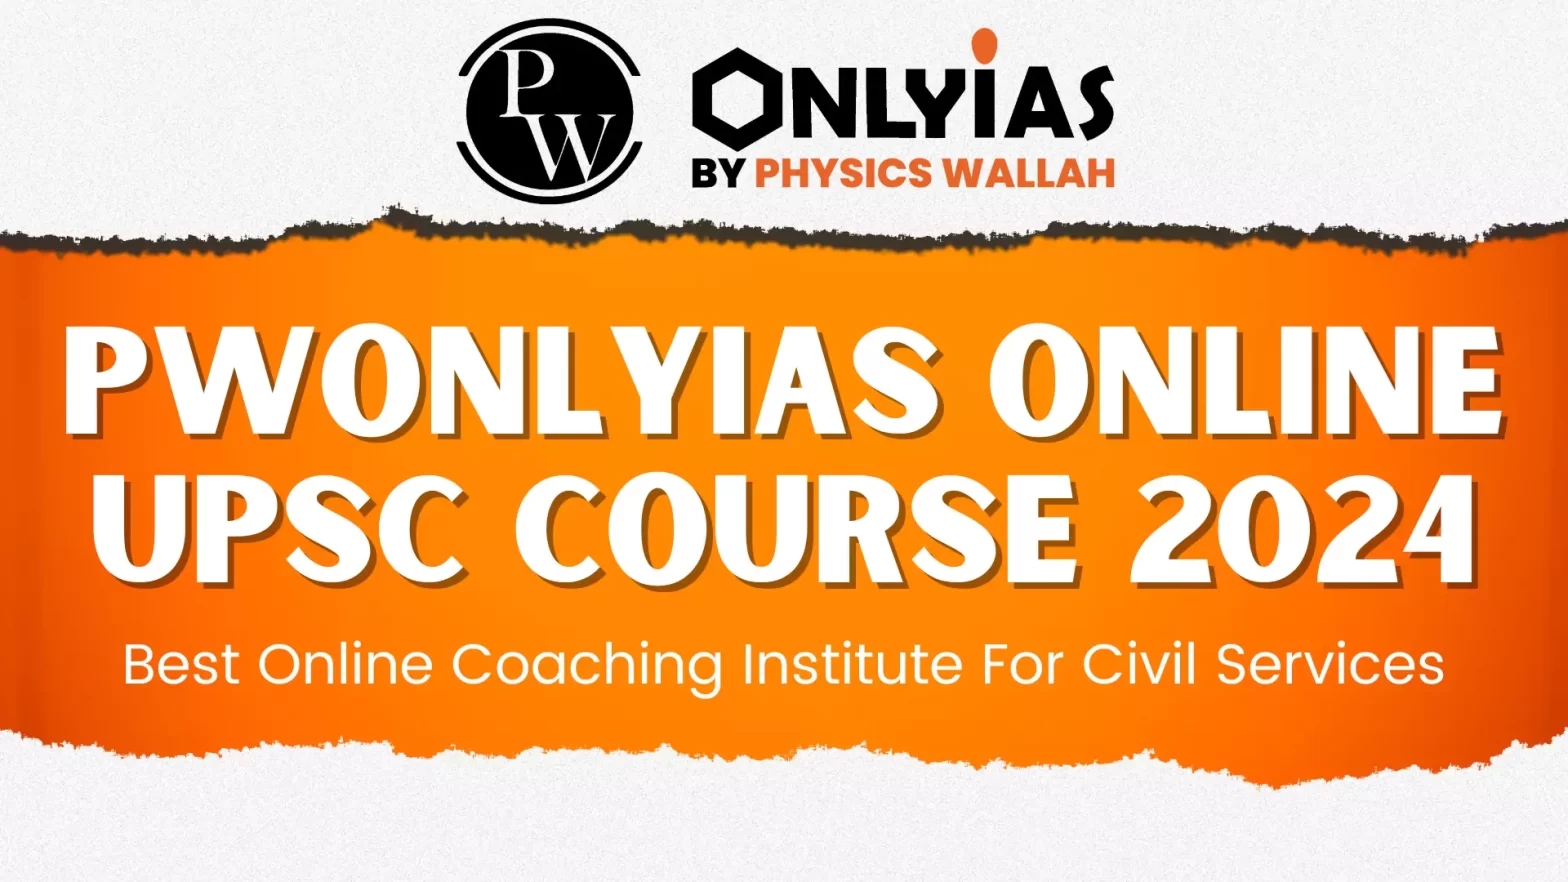 PWOnlyIAS Online UPSC Course 2024: Best Online Coaching Institute For Civil Services